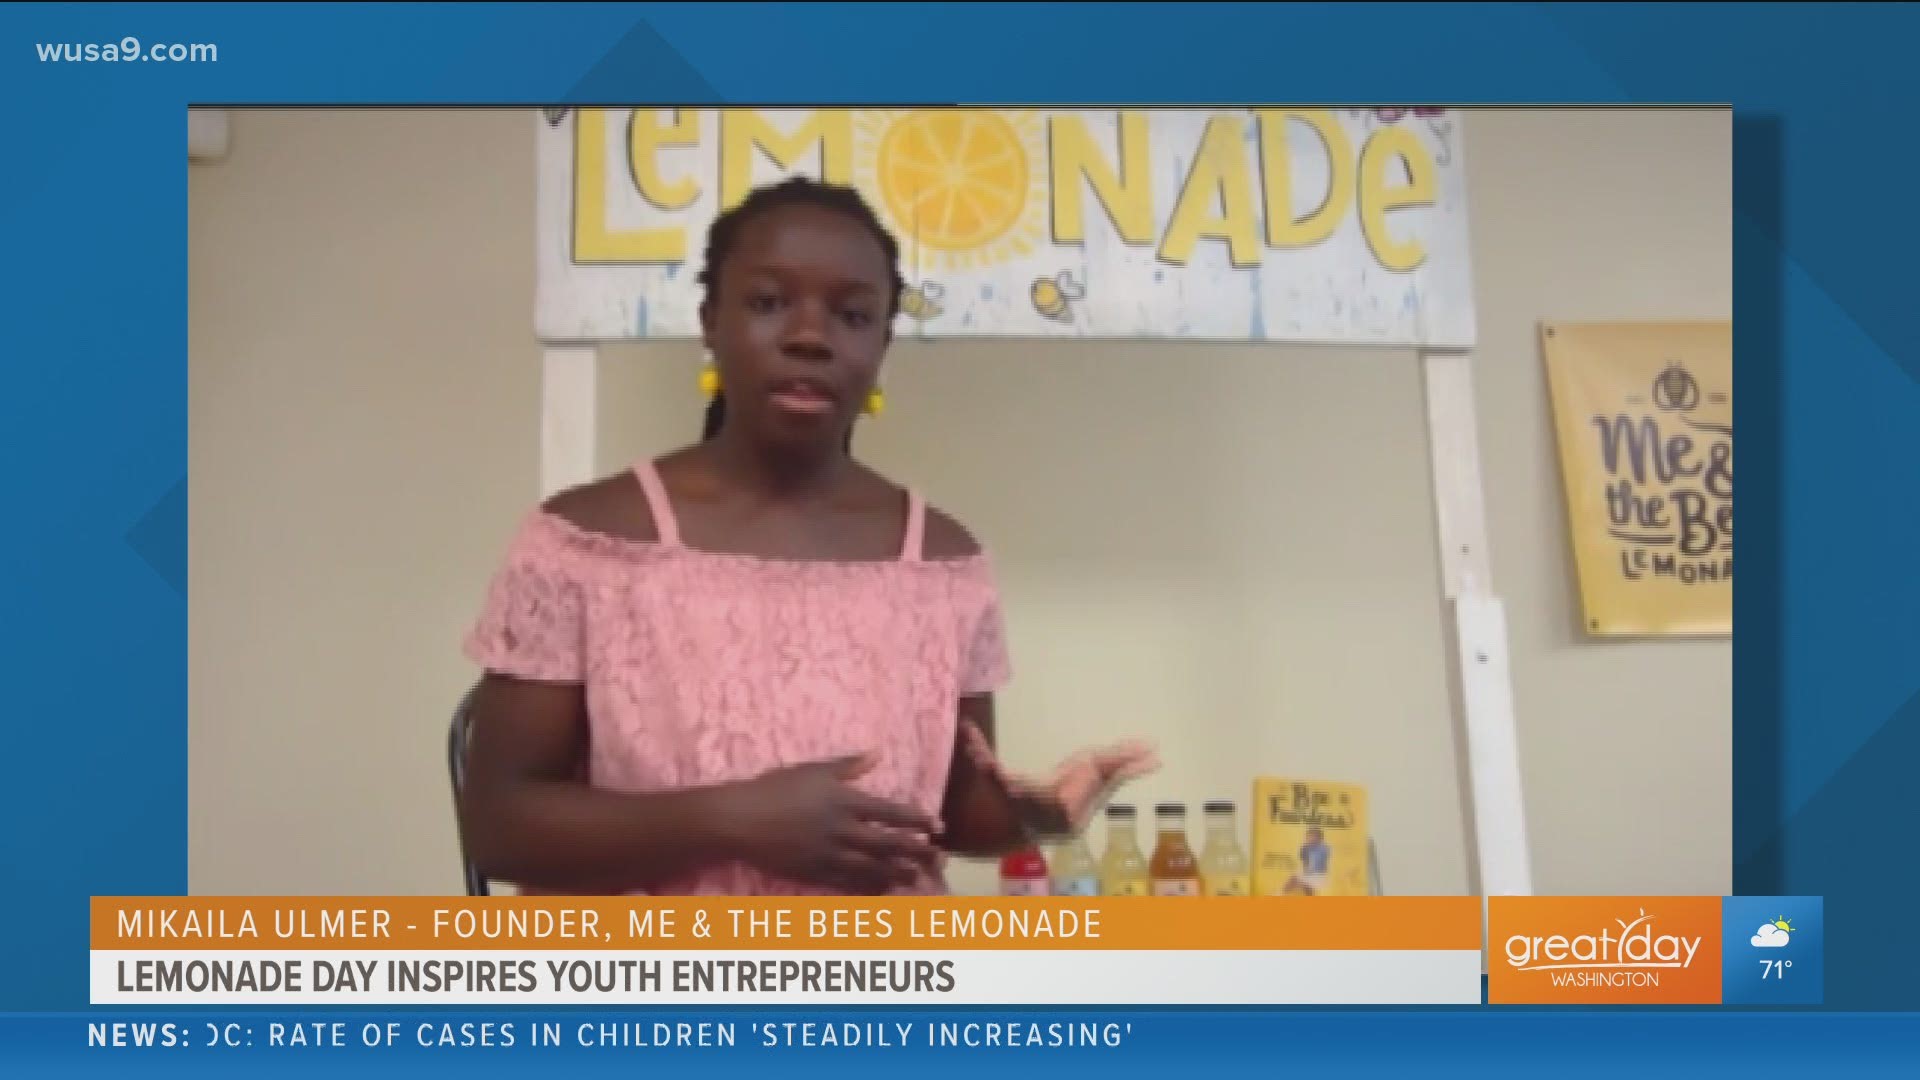 Lemonade Day Board Member, Joe Daly and Founder of Me & the Bees Lemonade, Mikaila Ulmer share how young people can excel as entrepreneurs.